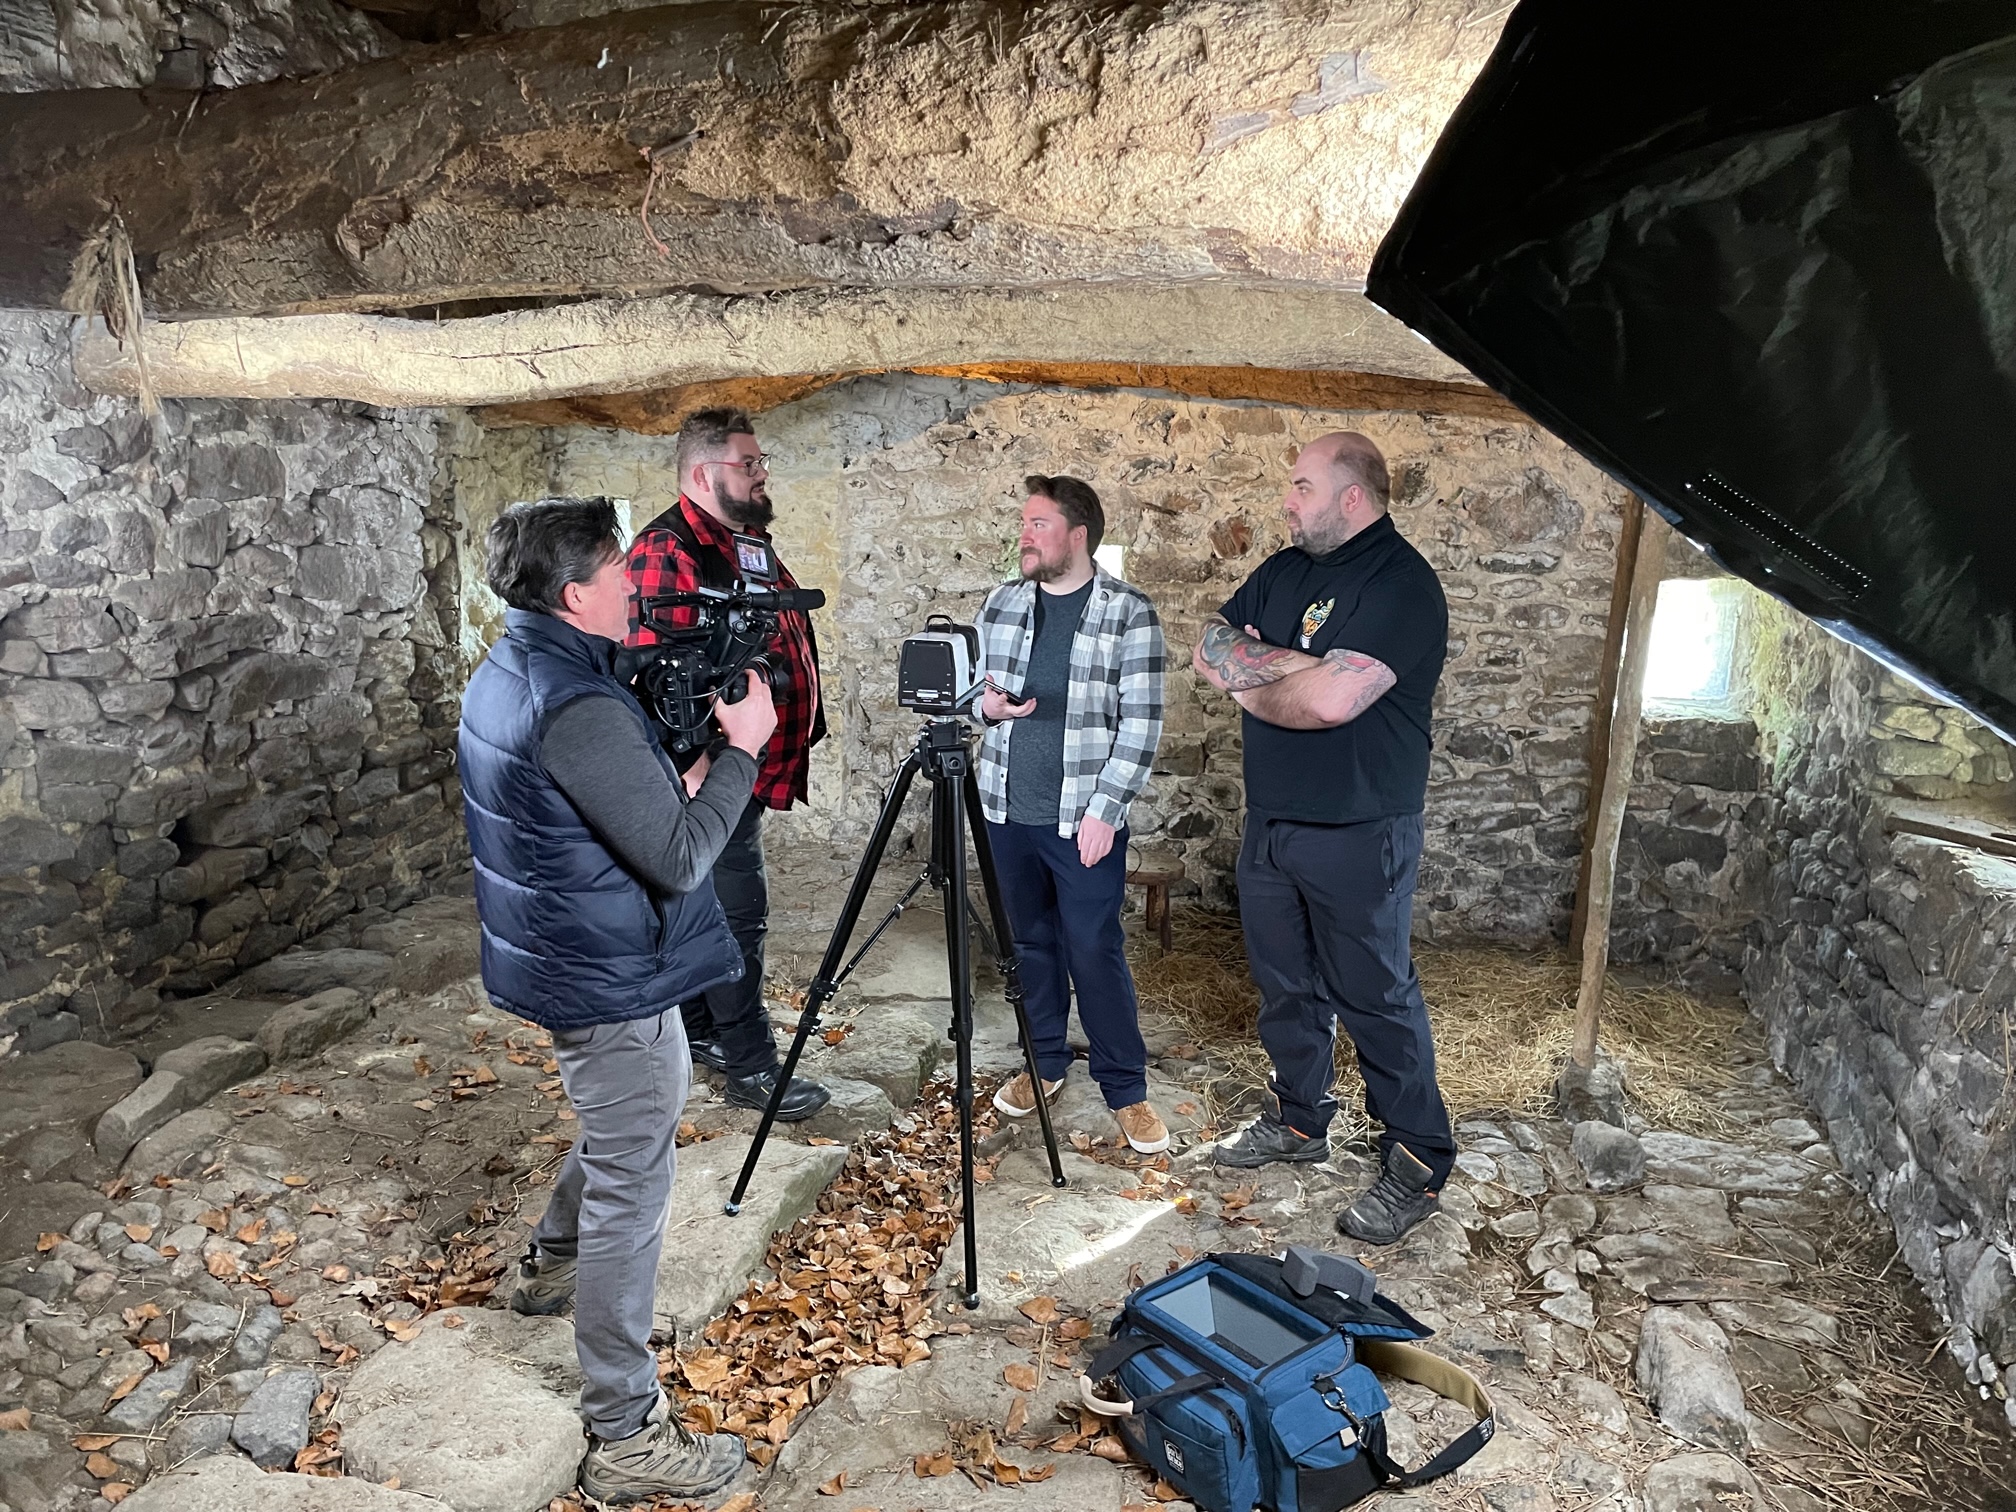 A man holding a camera filming three other men. They are in a cobblestone building.